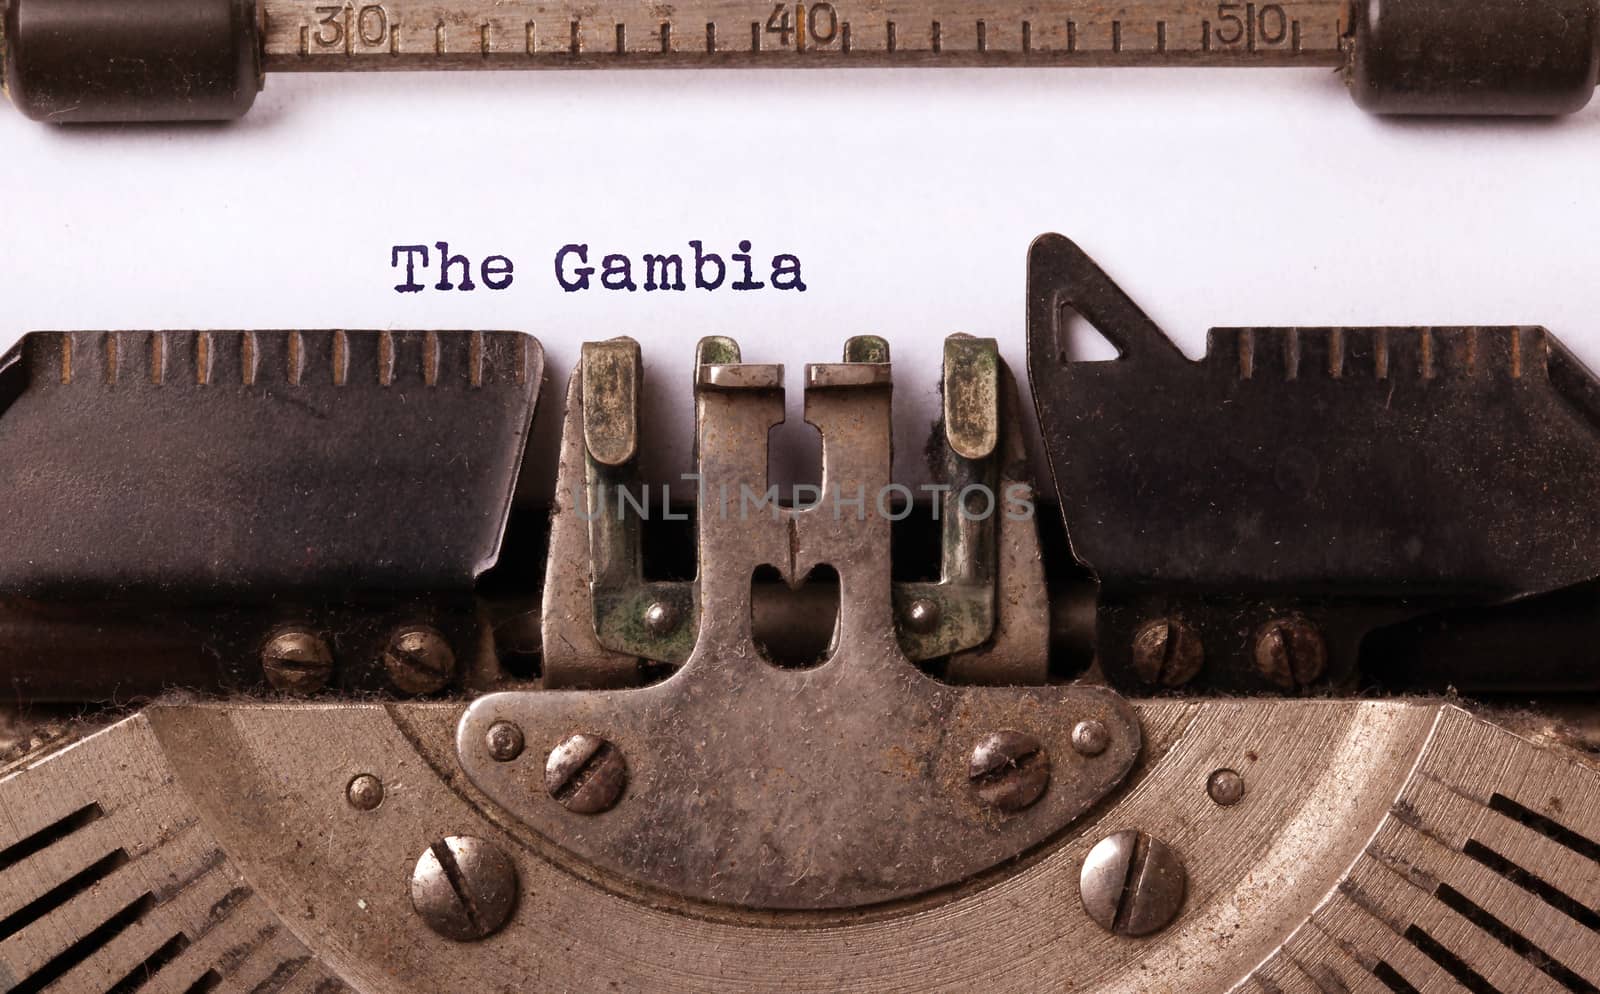 Inscription made by vinrage typewriter, country, The Gambia